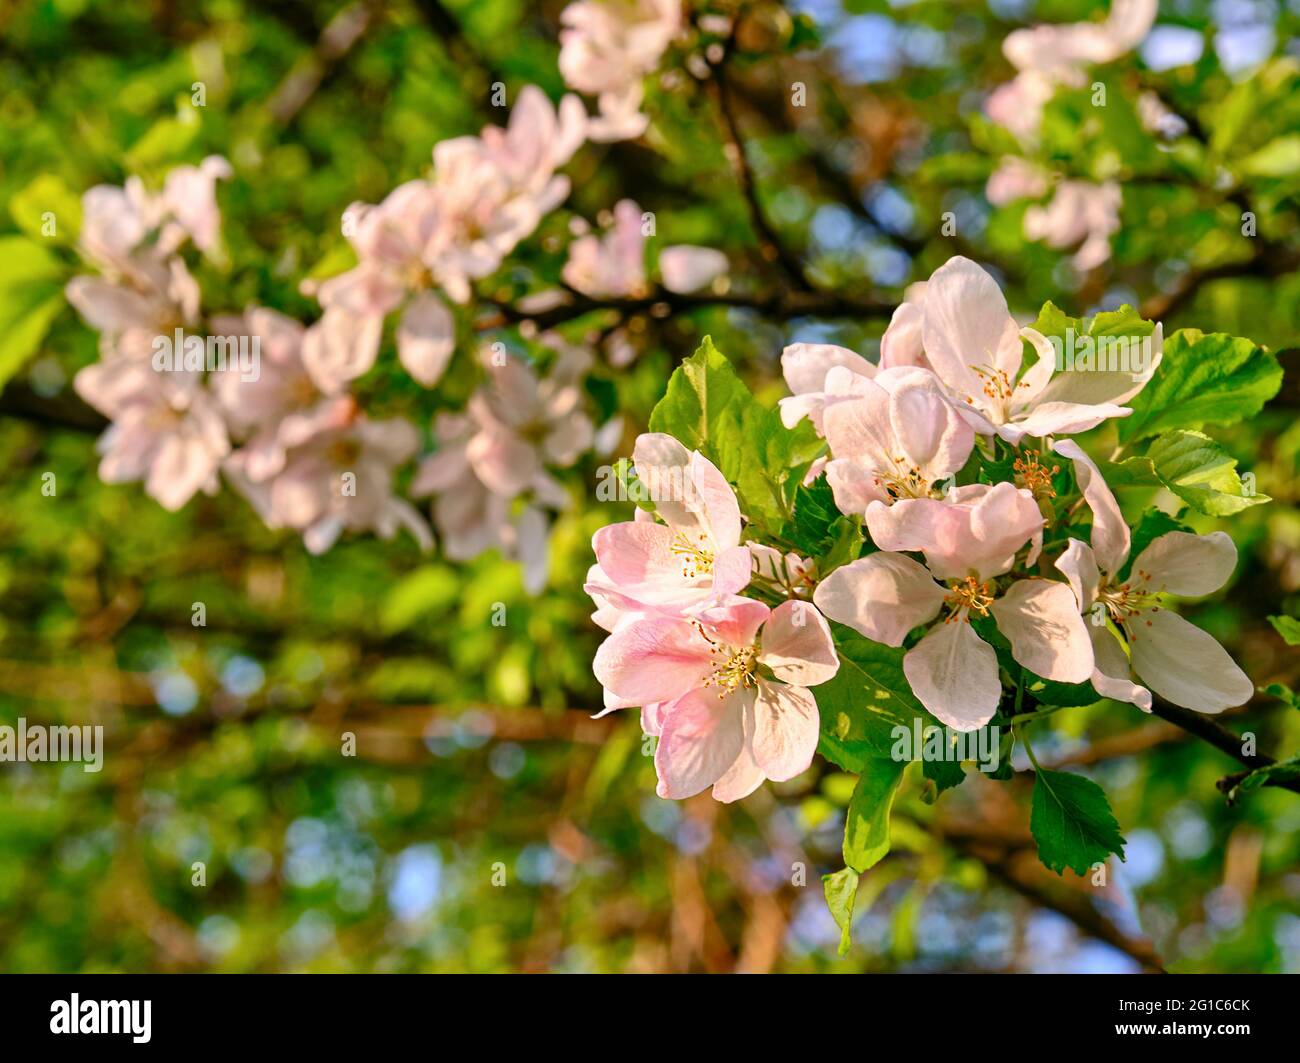 Expressive flowers of a blooming apple tree in the spring season Stock Photo